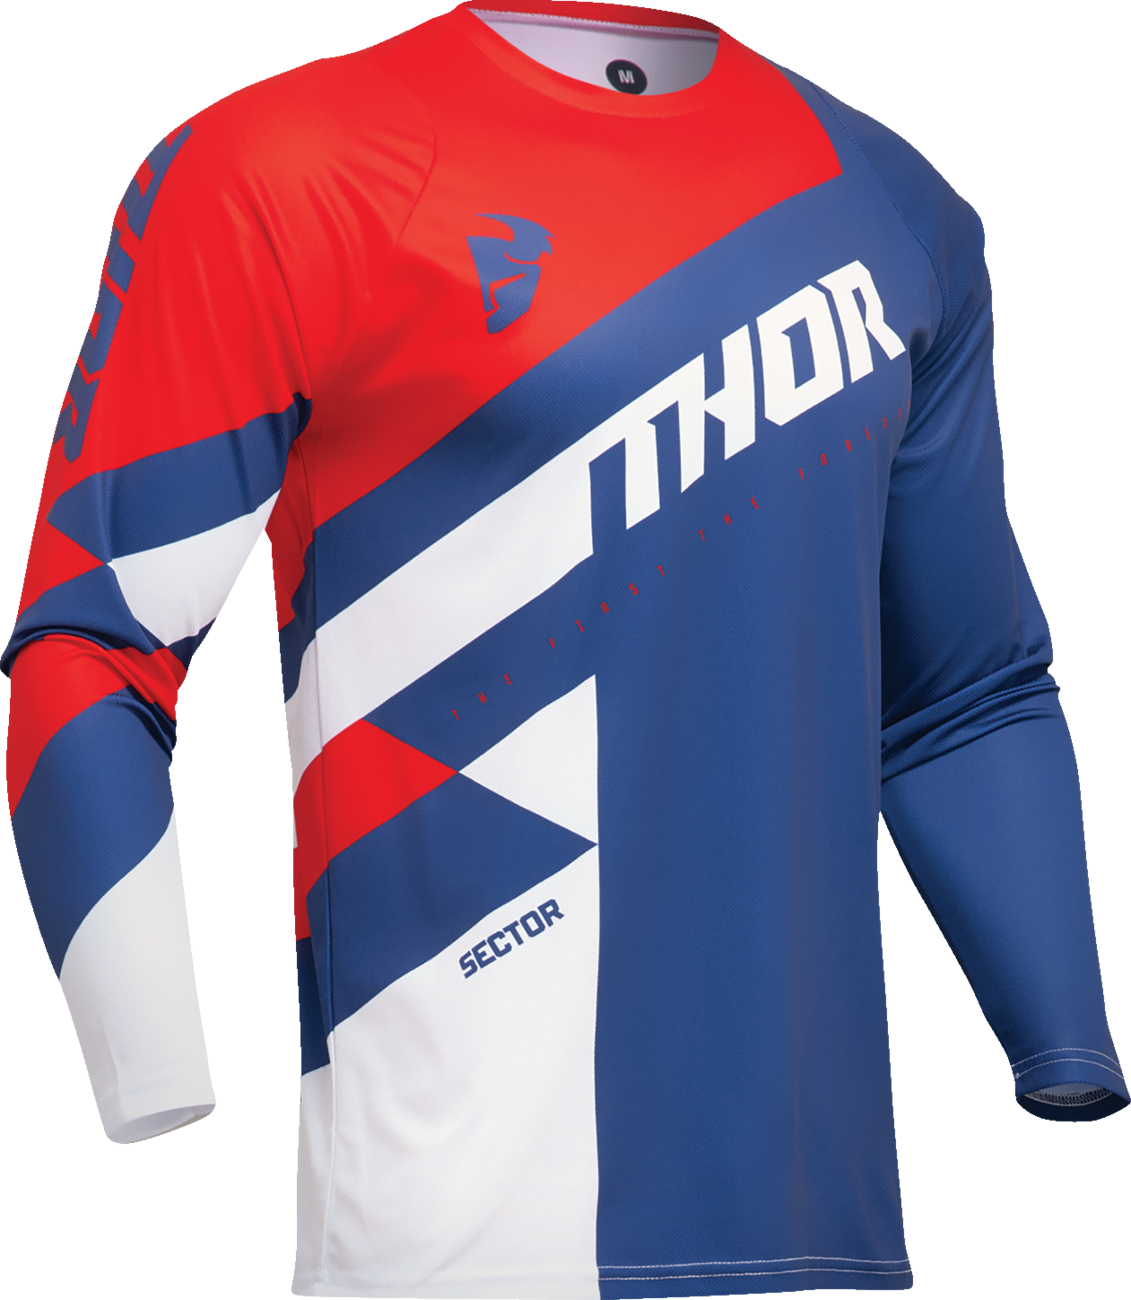 THOR Sector Checker Jersey - Navy/Red - XL 2910-7606